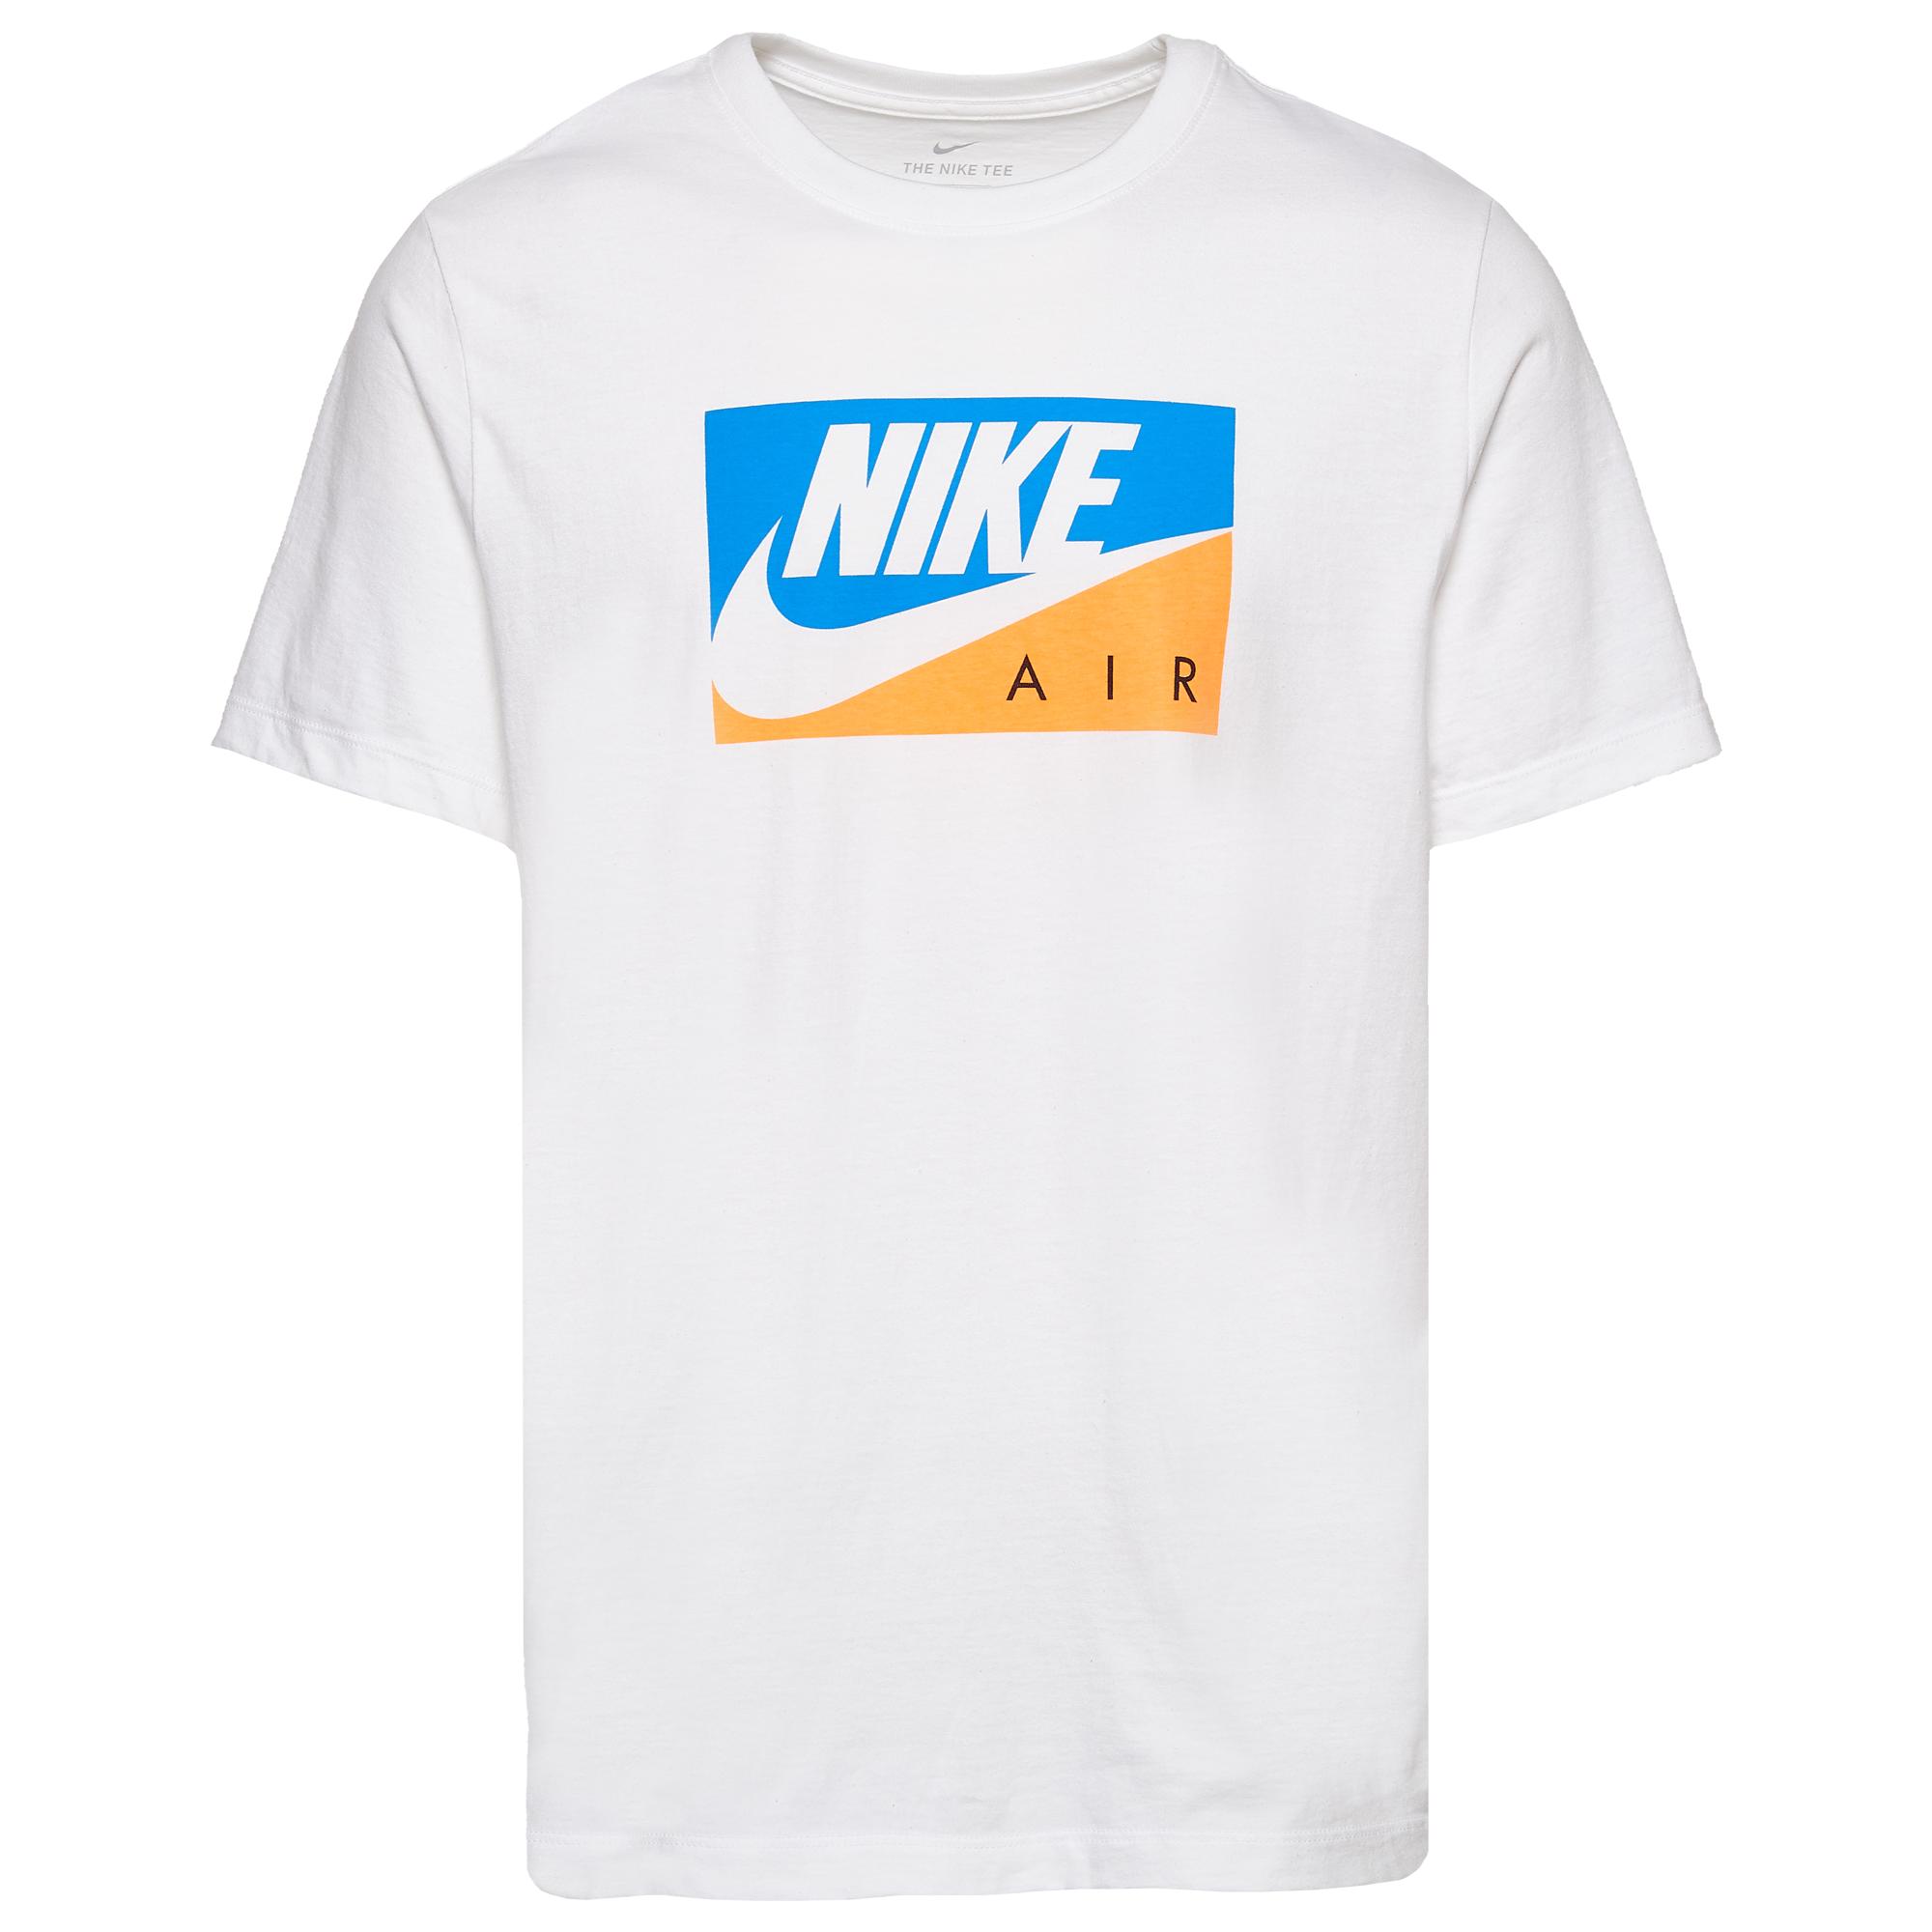 Nike Cotton Boxed Air T-shirt in White/Blue/Orange (Blue) for Men | Lyst